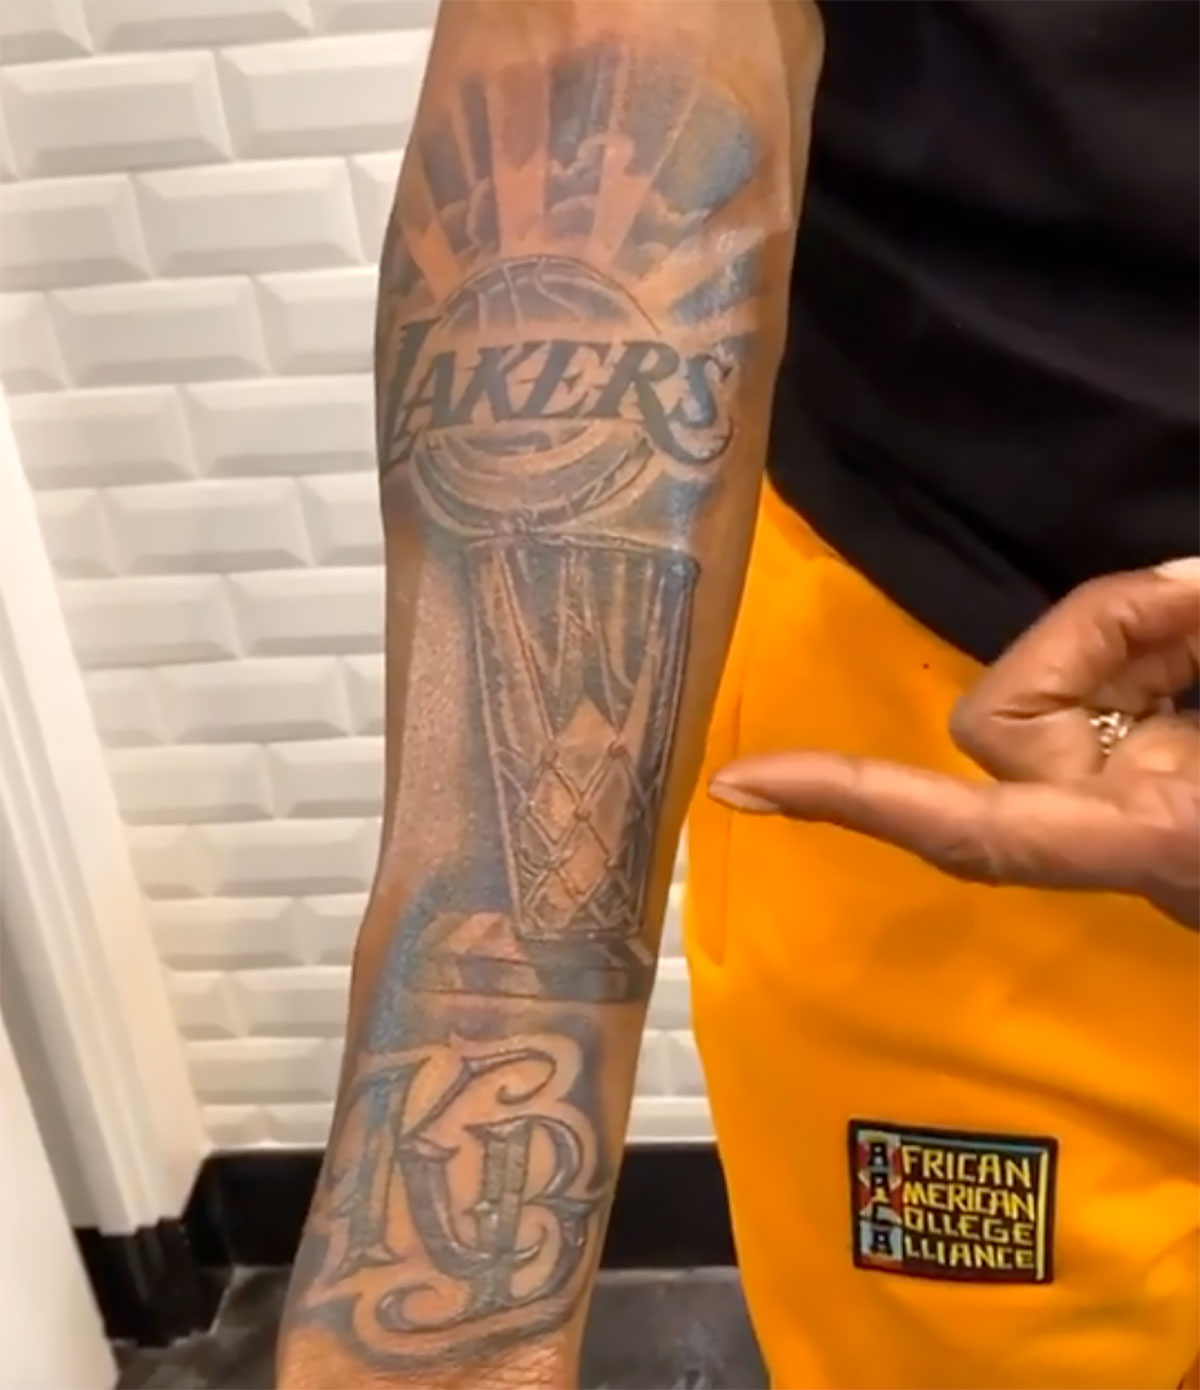 Celebrities pay tribute to Kobe and Gianna Bryant with tattoos